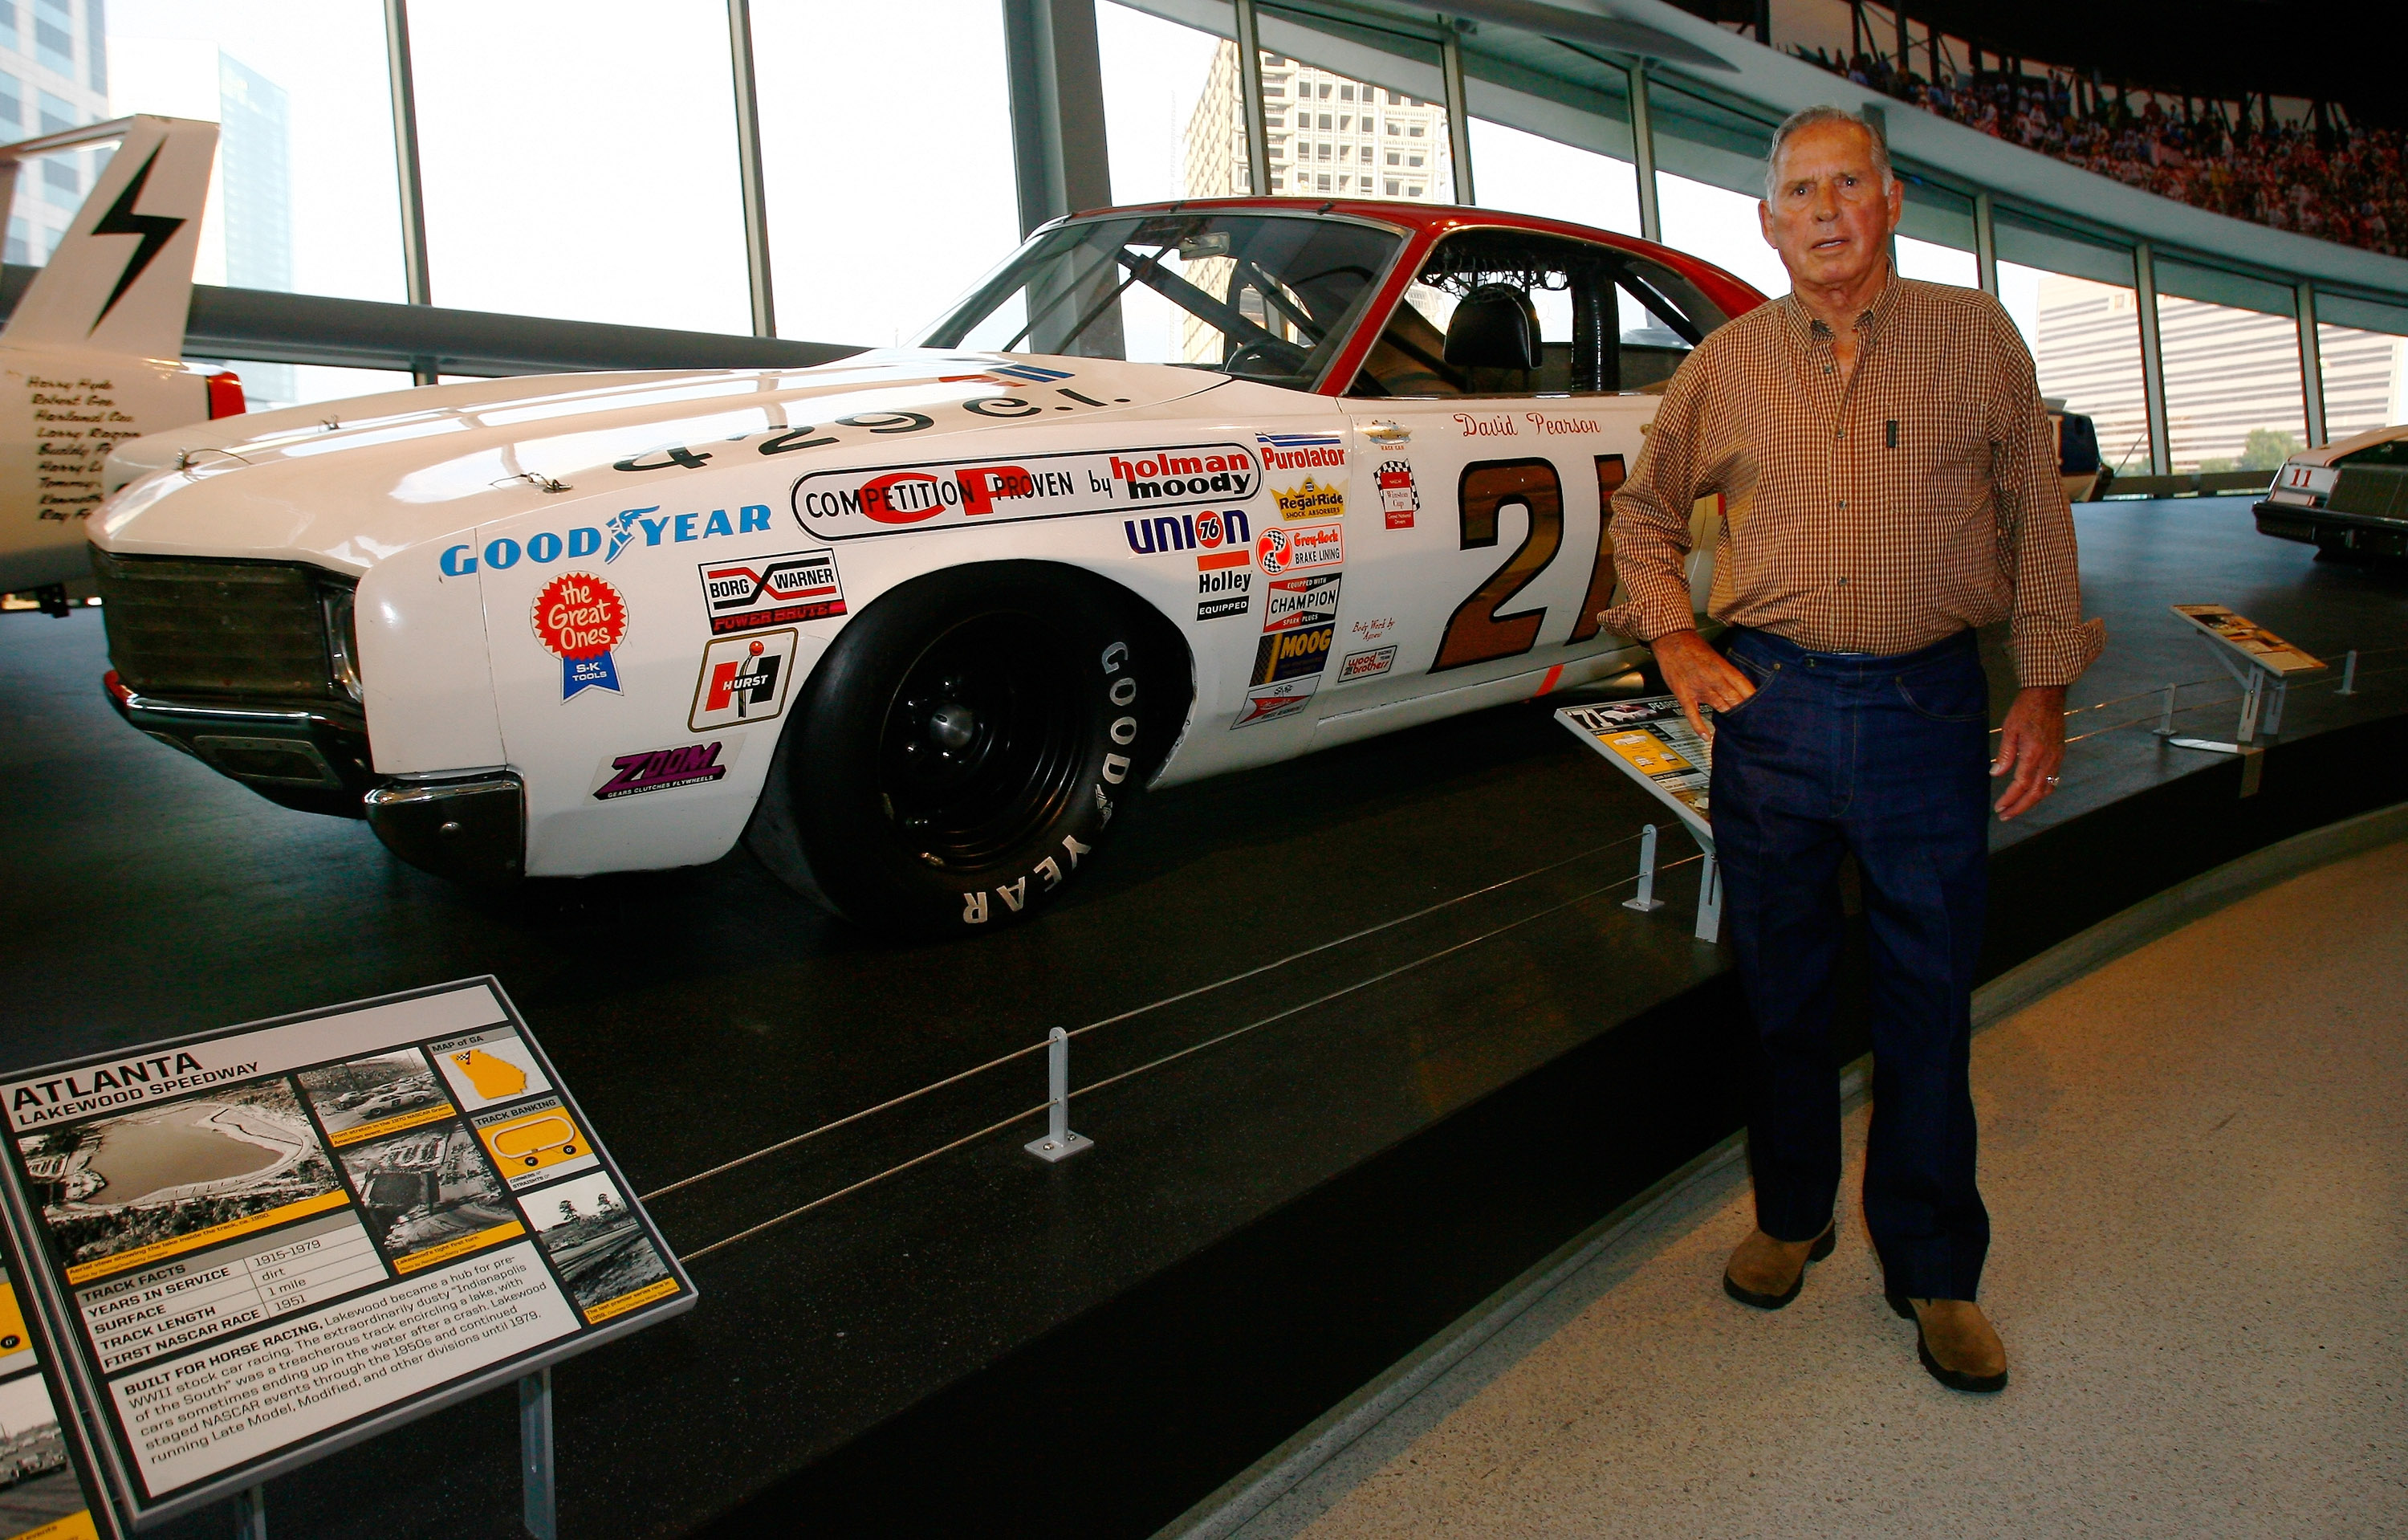 CHARLOTTE, NC - OCTOBER 13: NASCAR driver David Pearson poses in front of his race car on display during NASCAR Hall of Fame Voting Day at the NASCAR Hall of Fame on October 13, 2010 in Charlotte, North Carolina. (Photo by Jason Smith/Getty Images for NAS